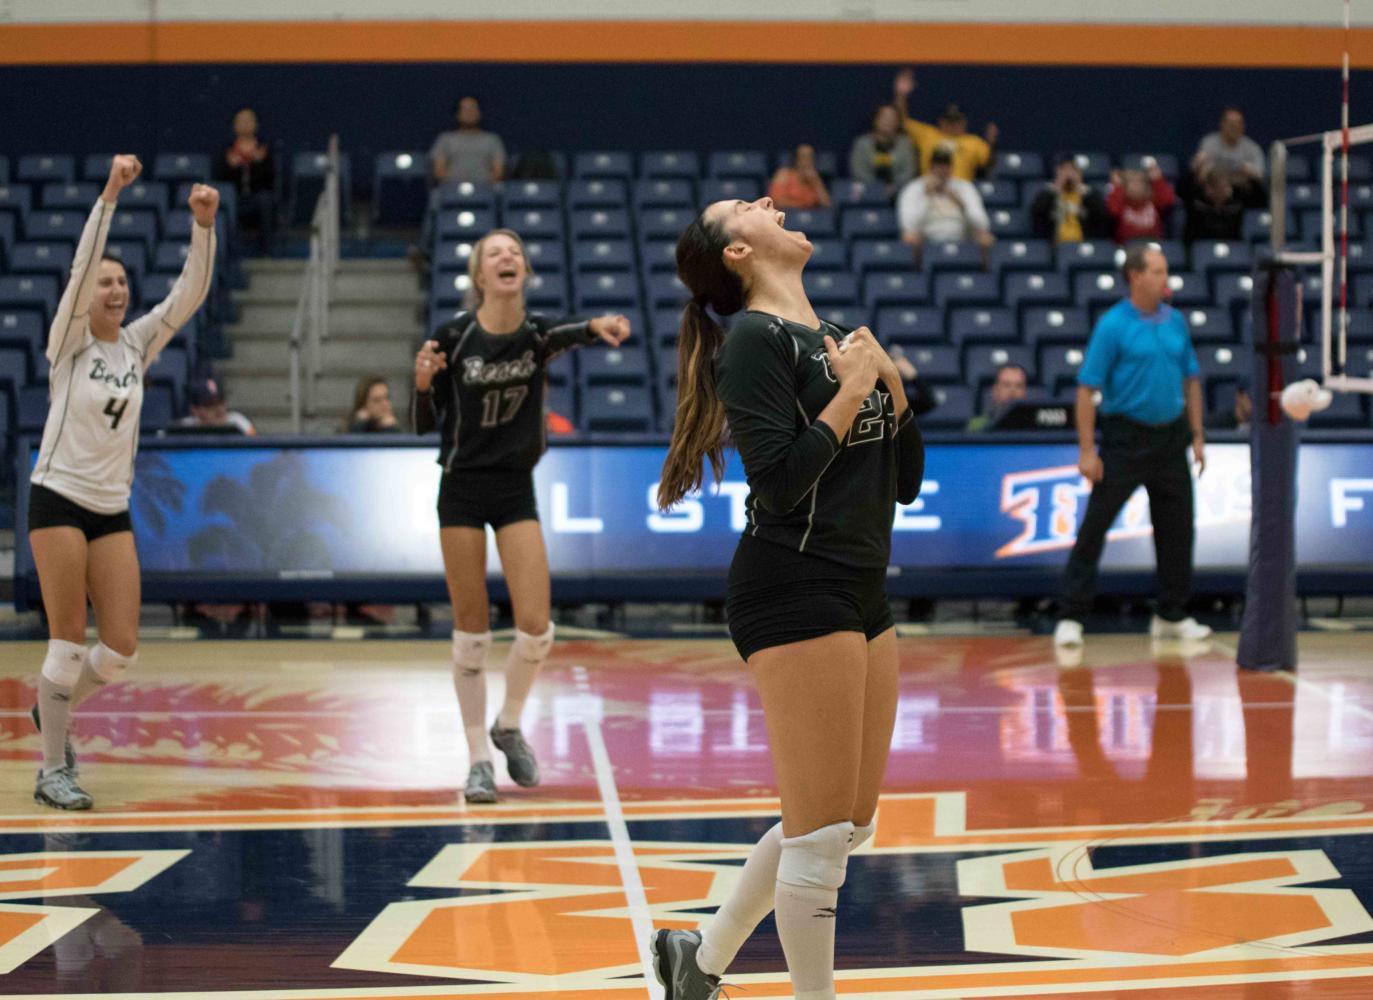 Senior Alexis Patterson celebrates LBSU's victory after sweeping Cal State Fullerton in Tuesday's match at Titan Gym.